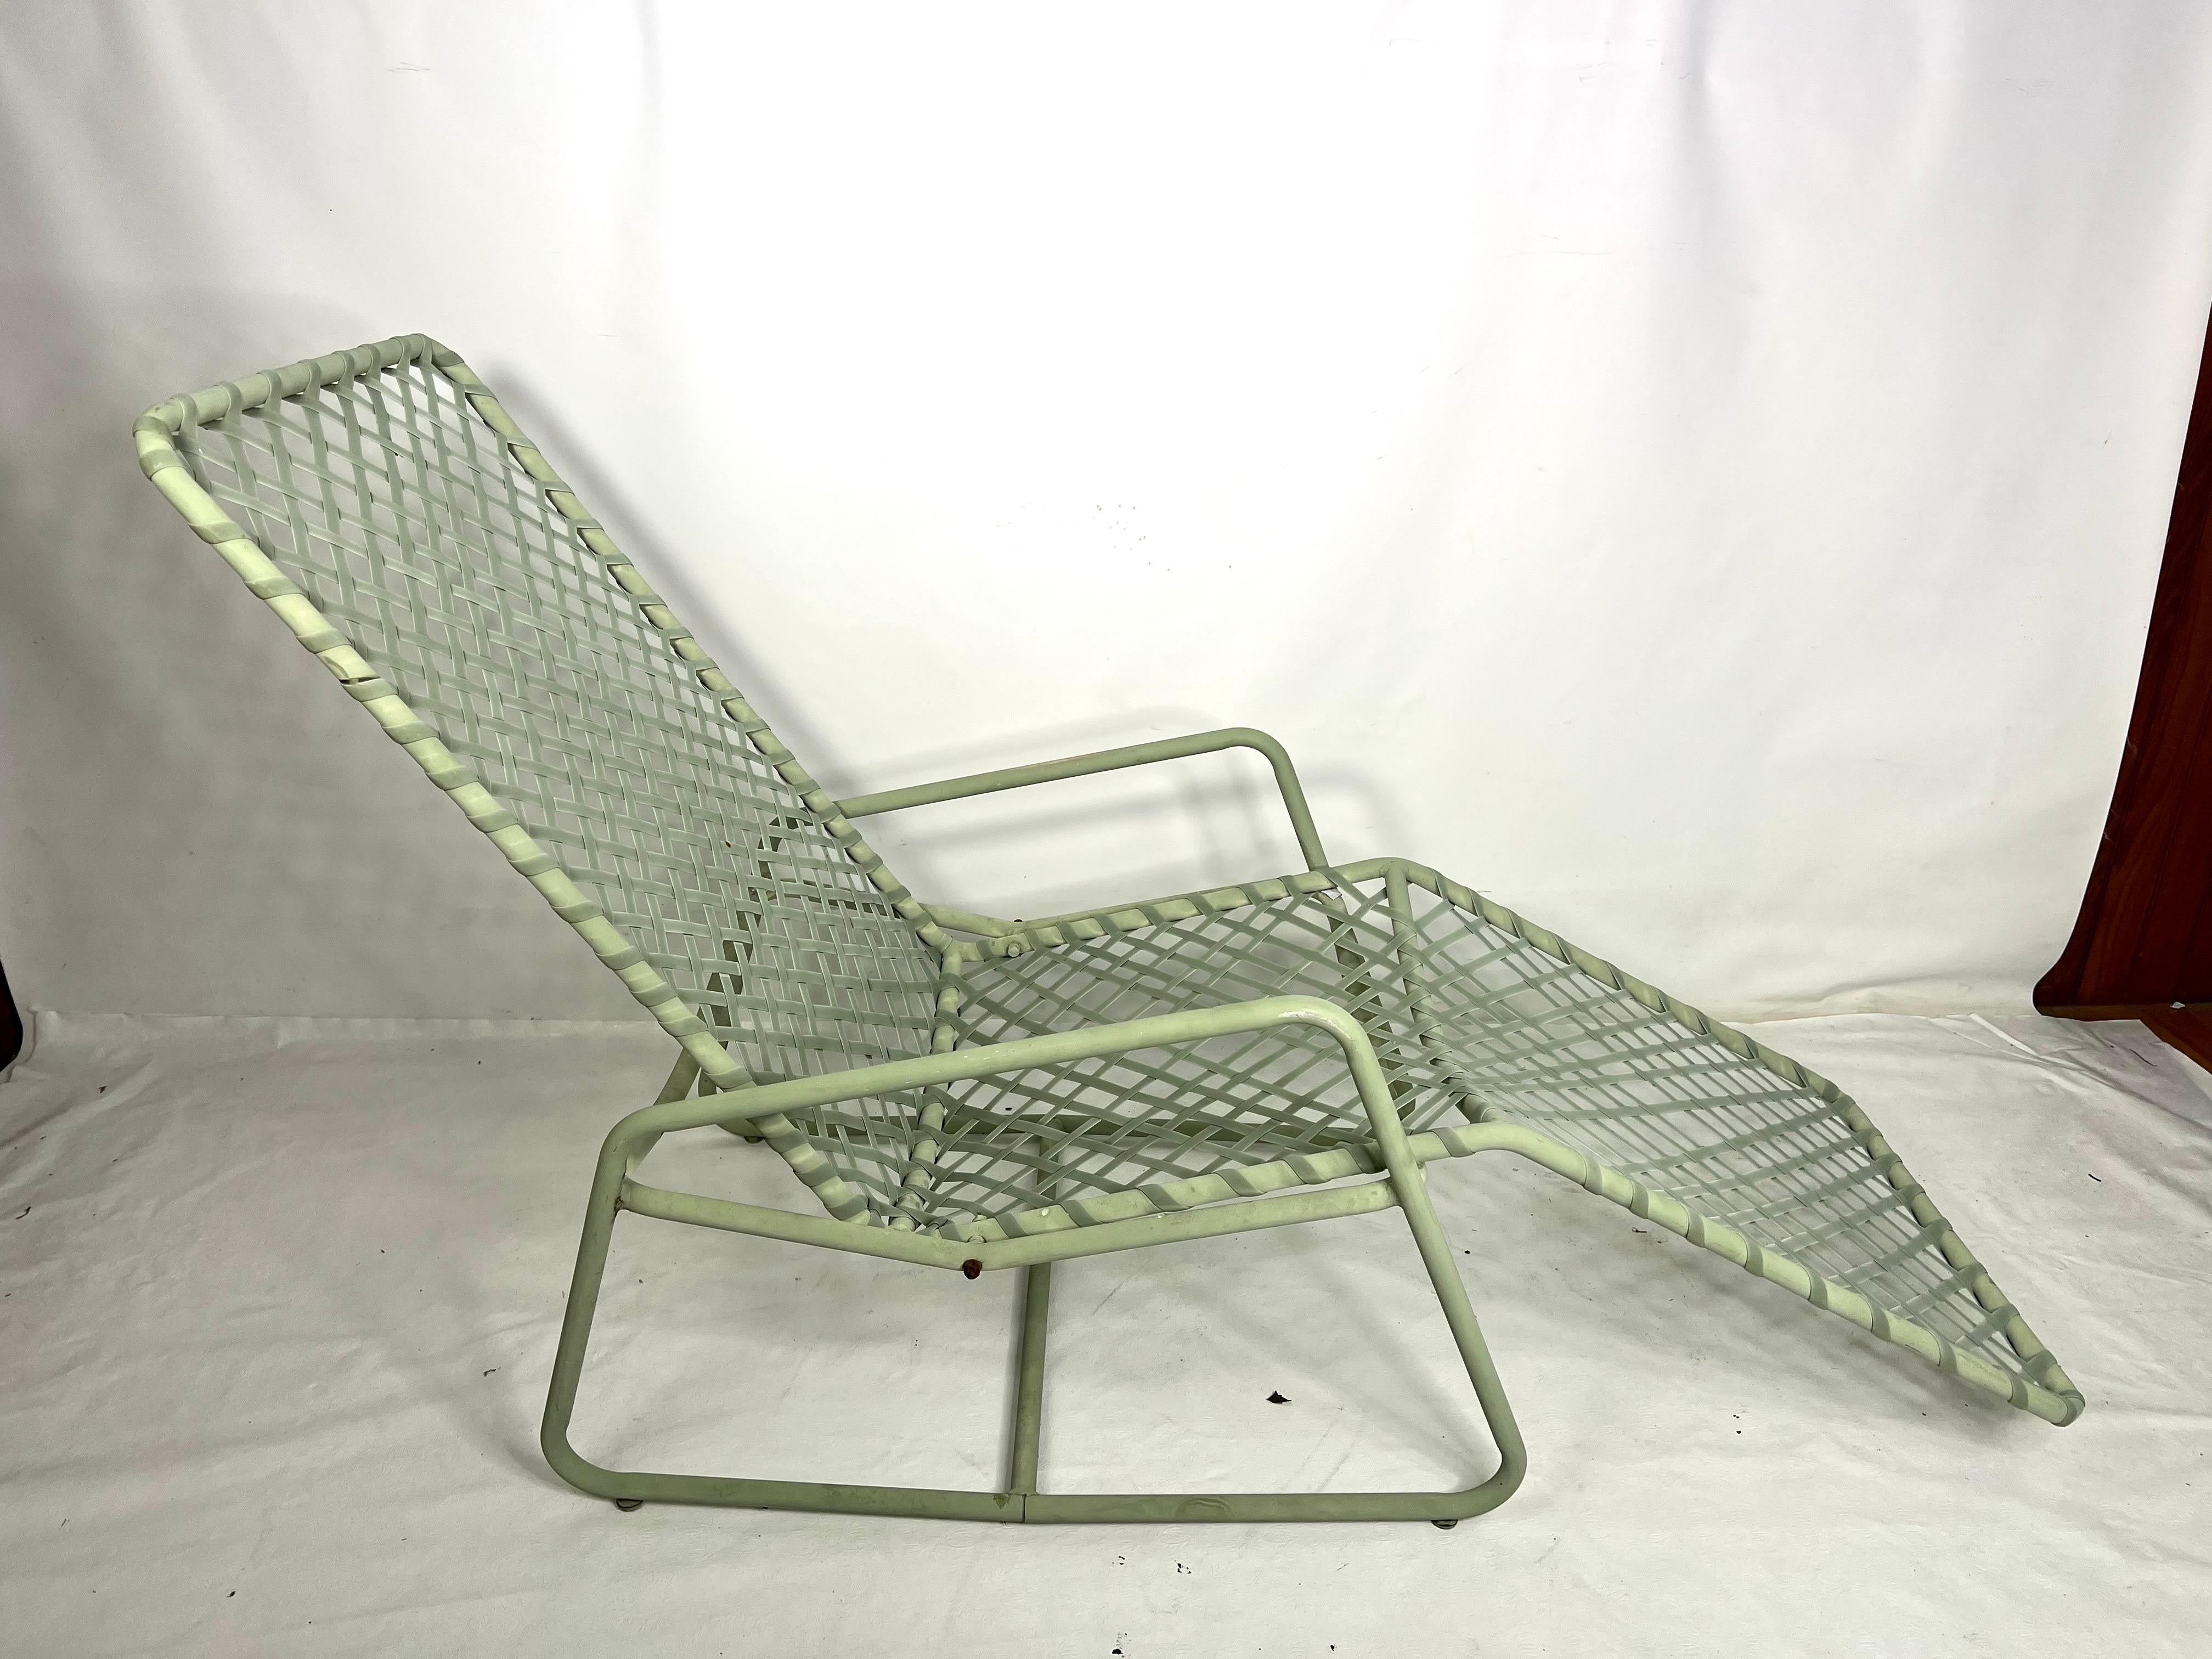 This is a very unique lounge chair made by brown Jordan in pale green. The lounge chair does tilt back and the seat h is 15.75”